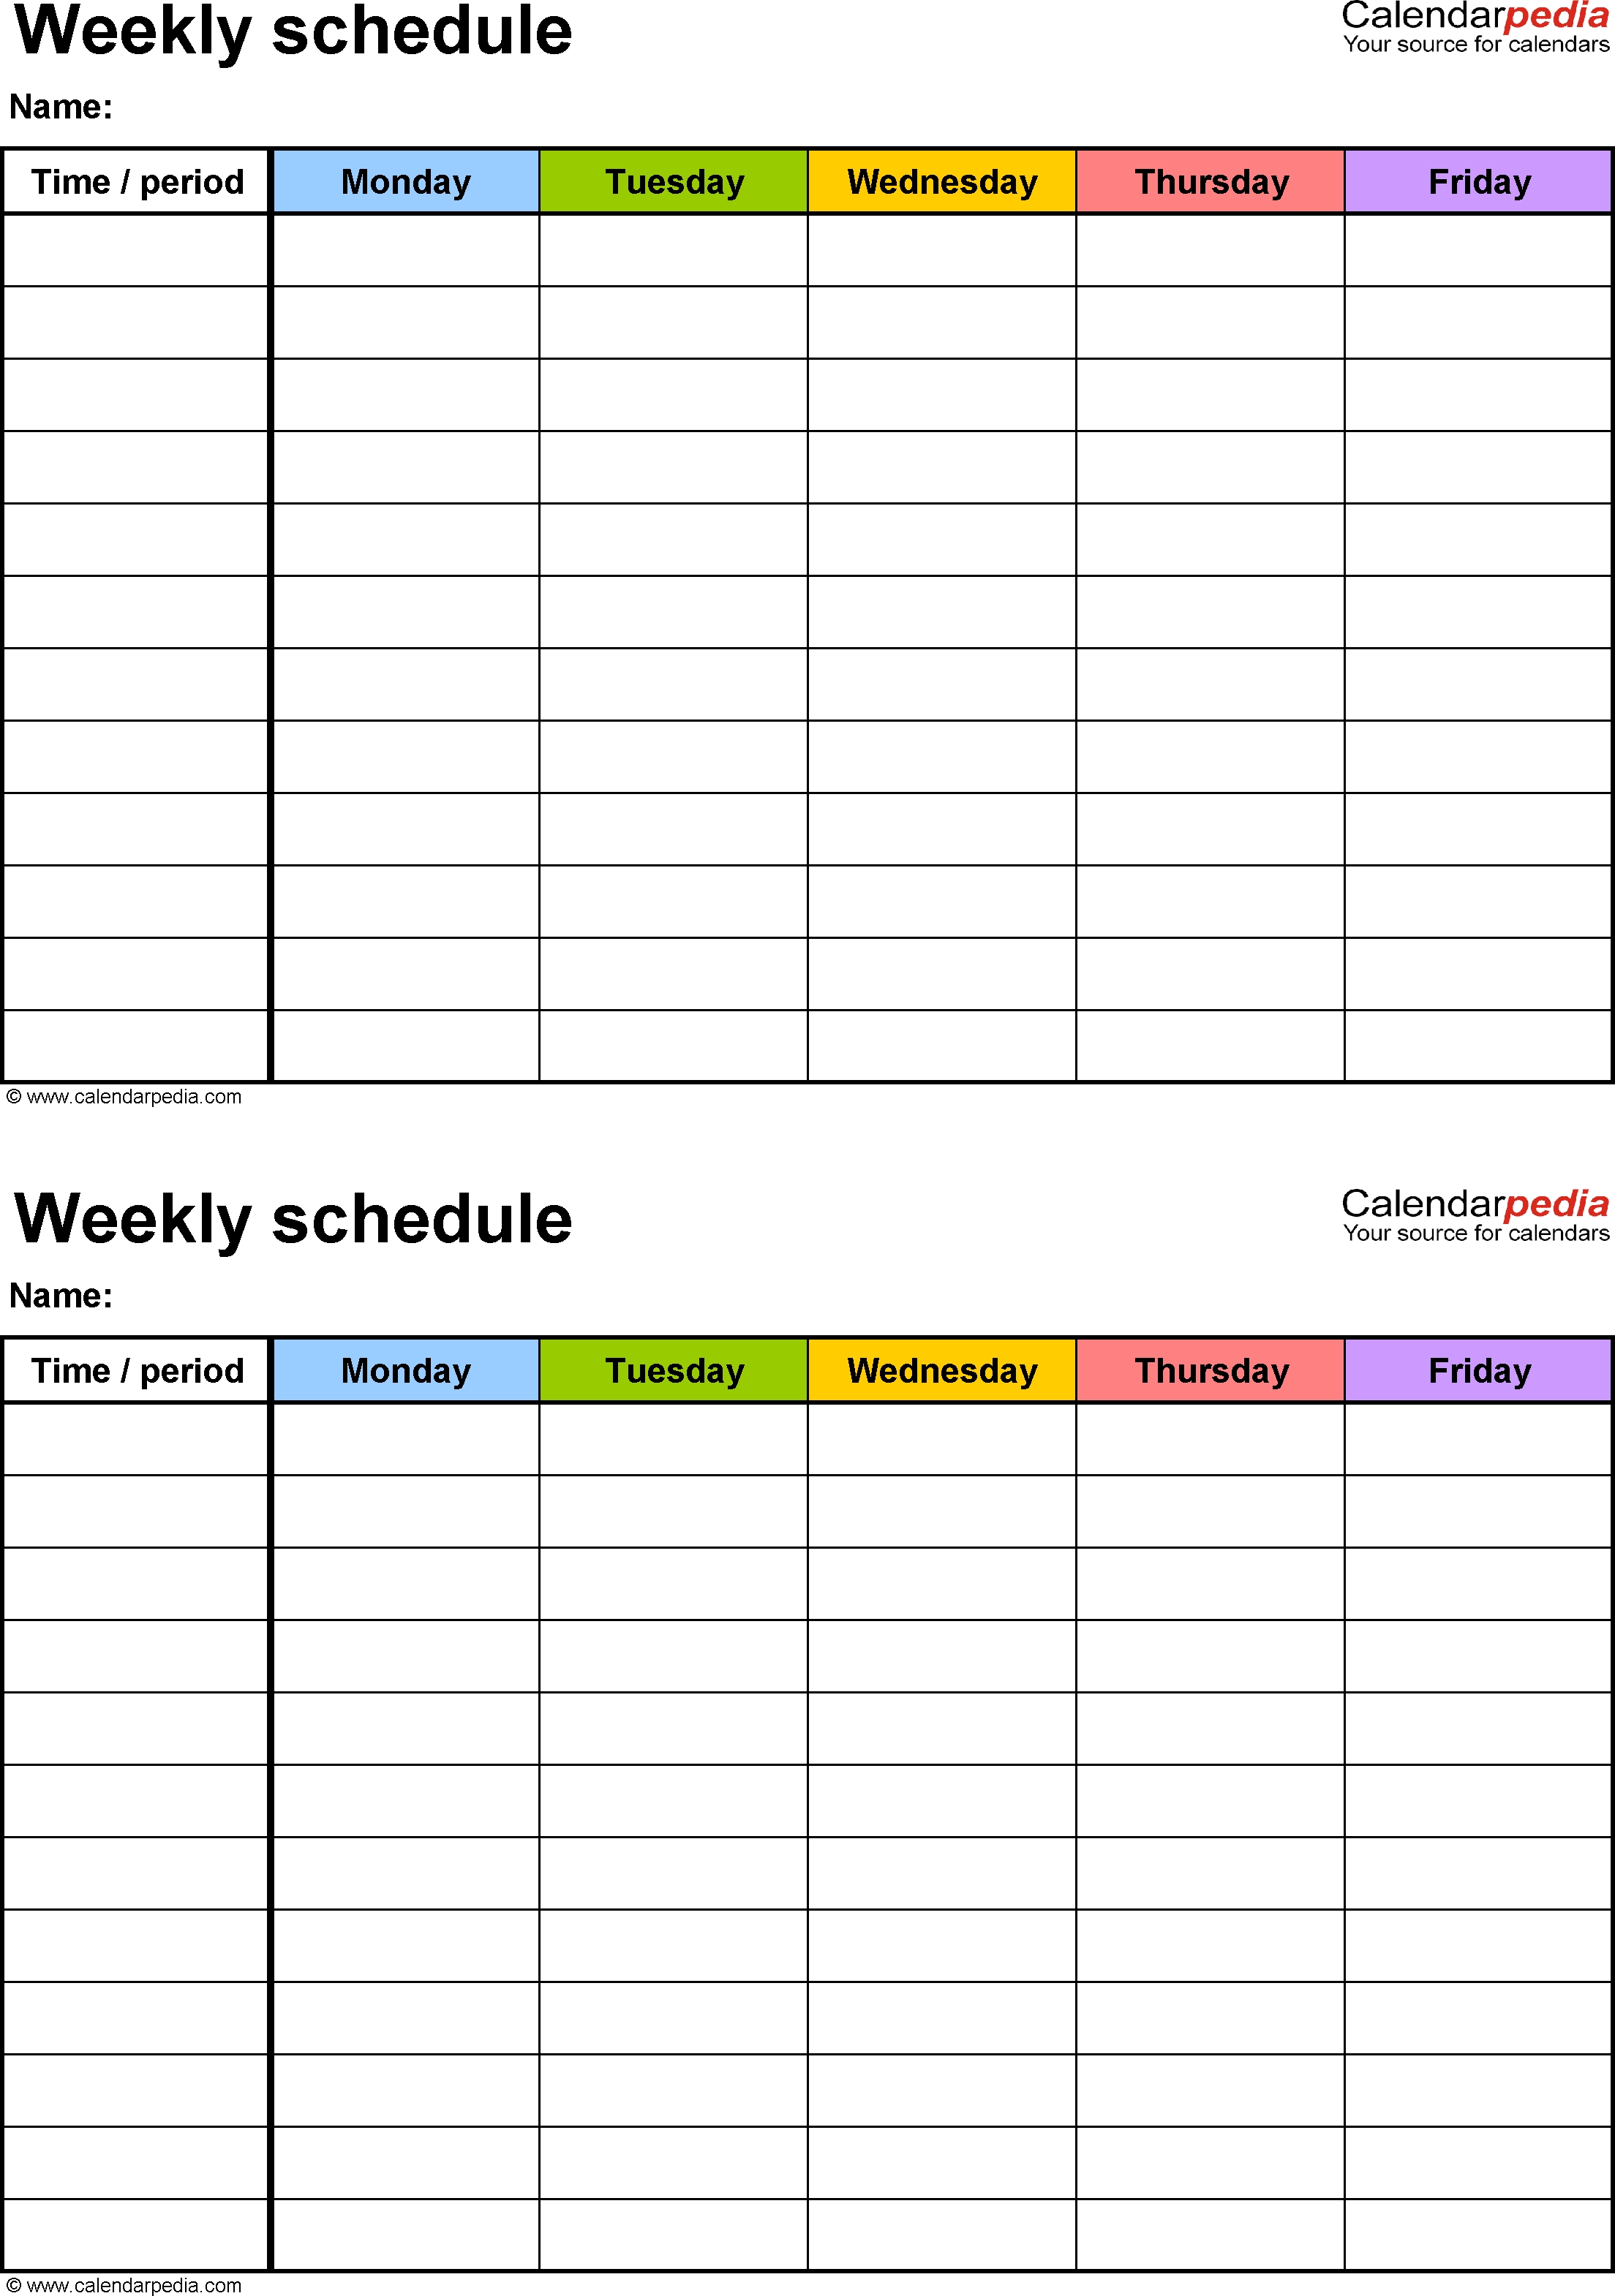 Free Weekly Schedule Templates For Word - 18 Templates-Blank Time Slot Week Schedules